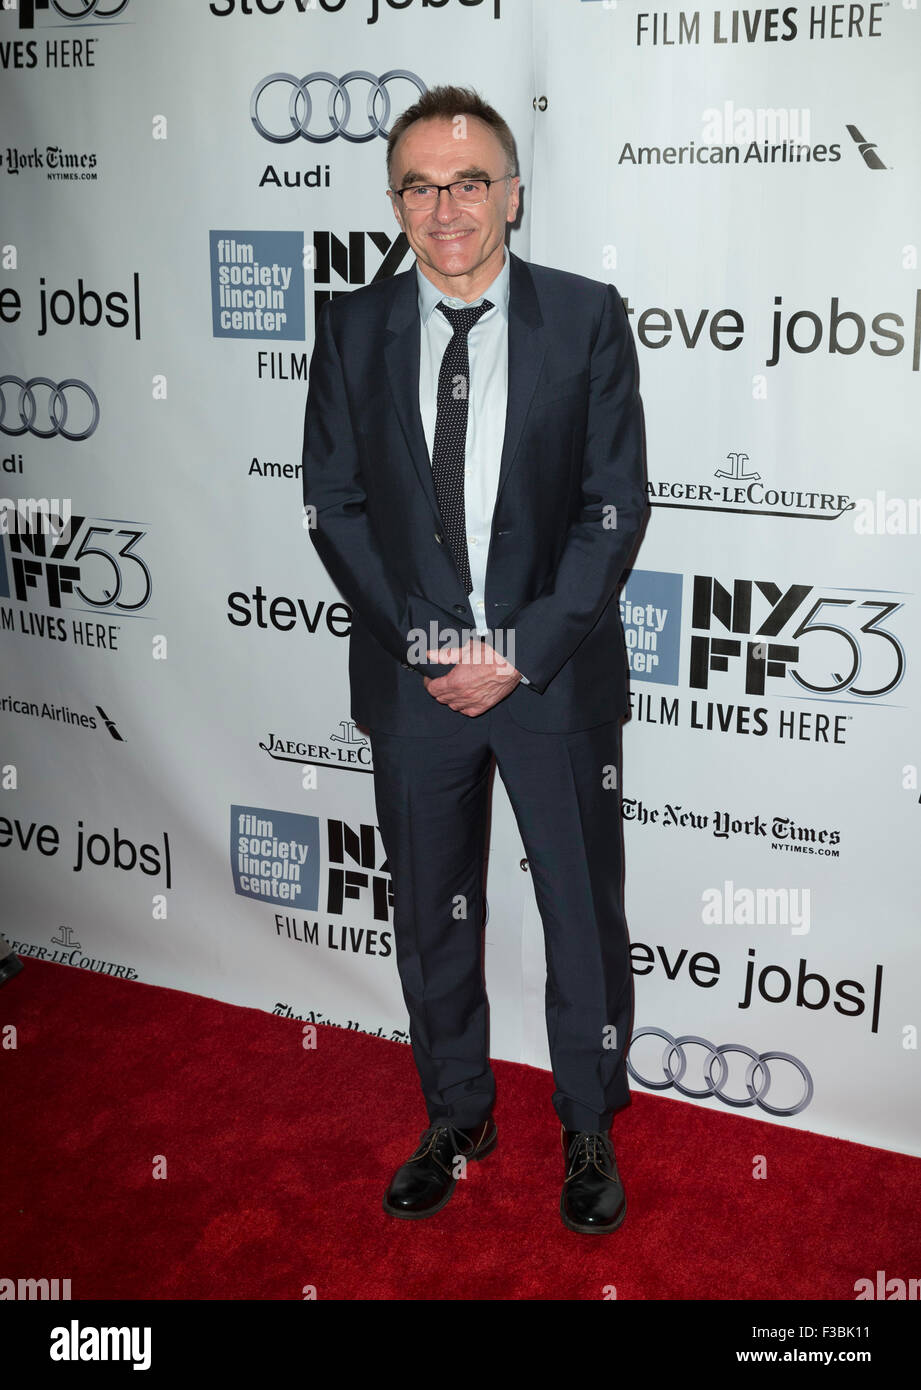 New York, NY - October 3, 2015: Director Danny Boyle  attends the Steve Jobs Premiere during the 53rd Annual New York Film Festival at Alice Tully Hall Stock Photo